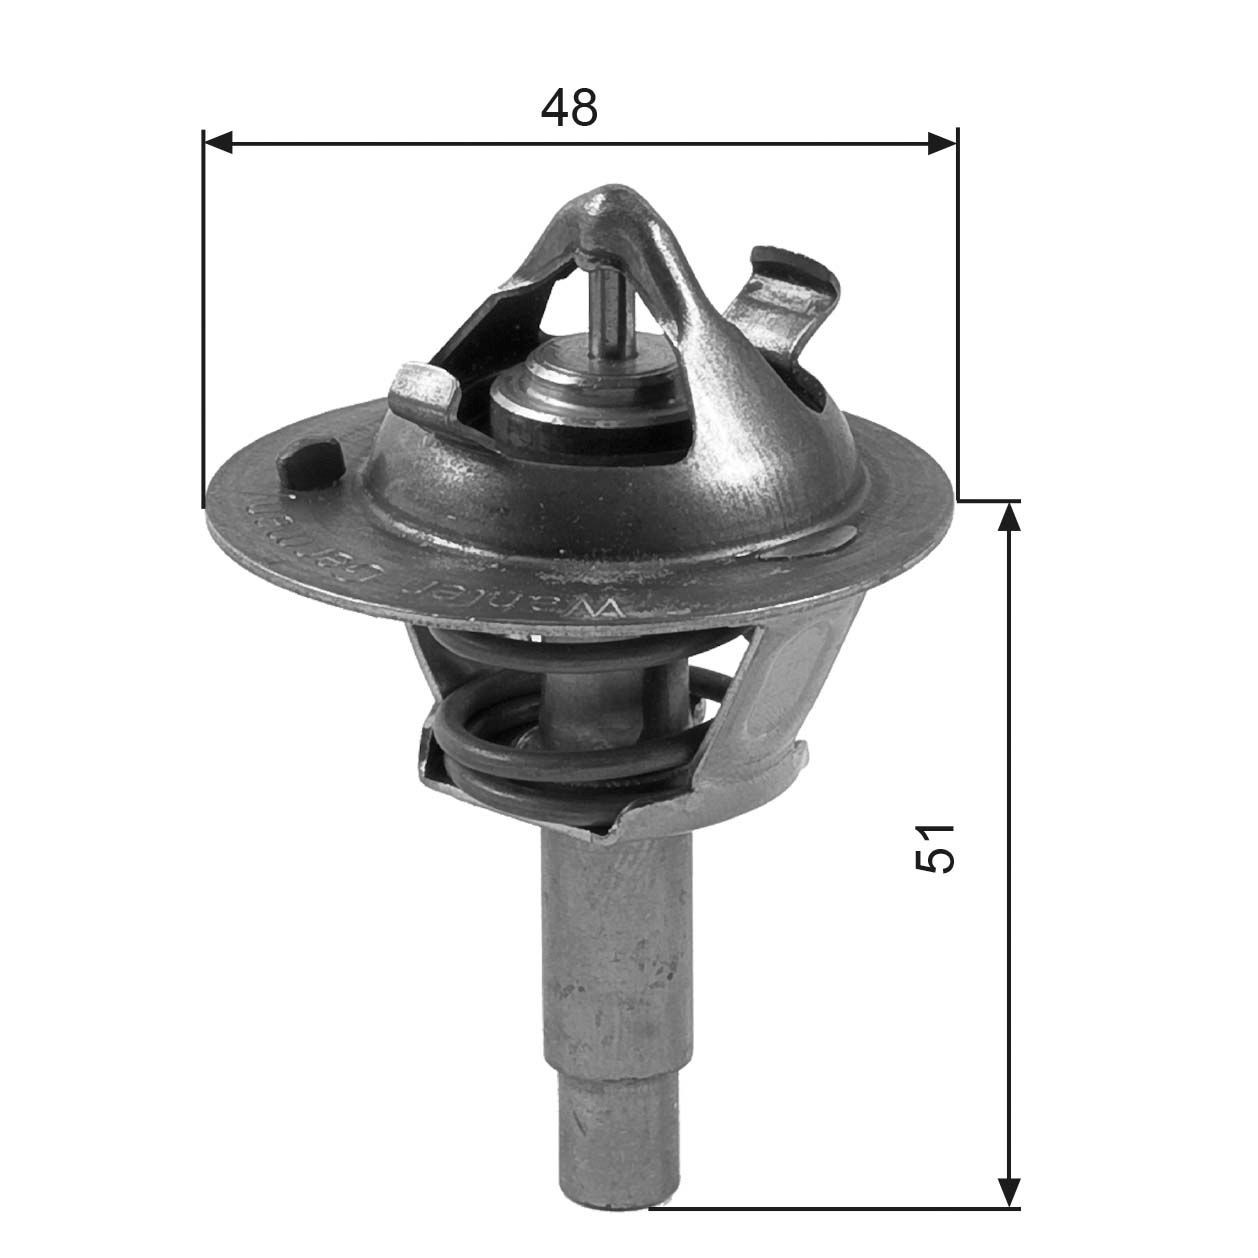 GATES TH38490G1 Engine thermostat Opening Temperature: 90°C, with gaskets/seals, without housing